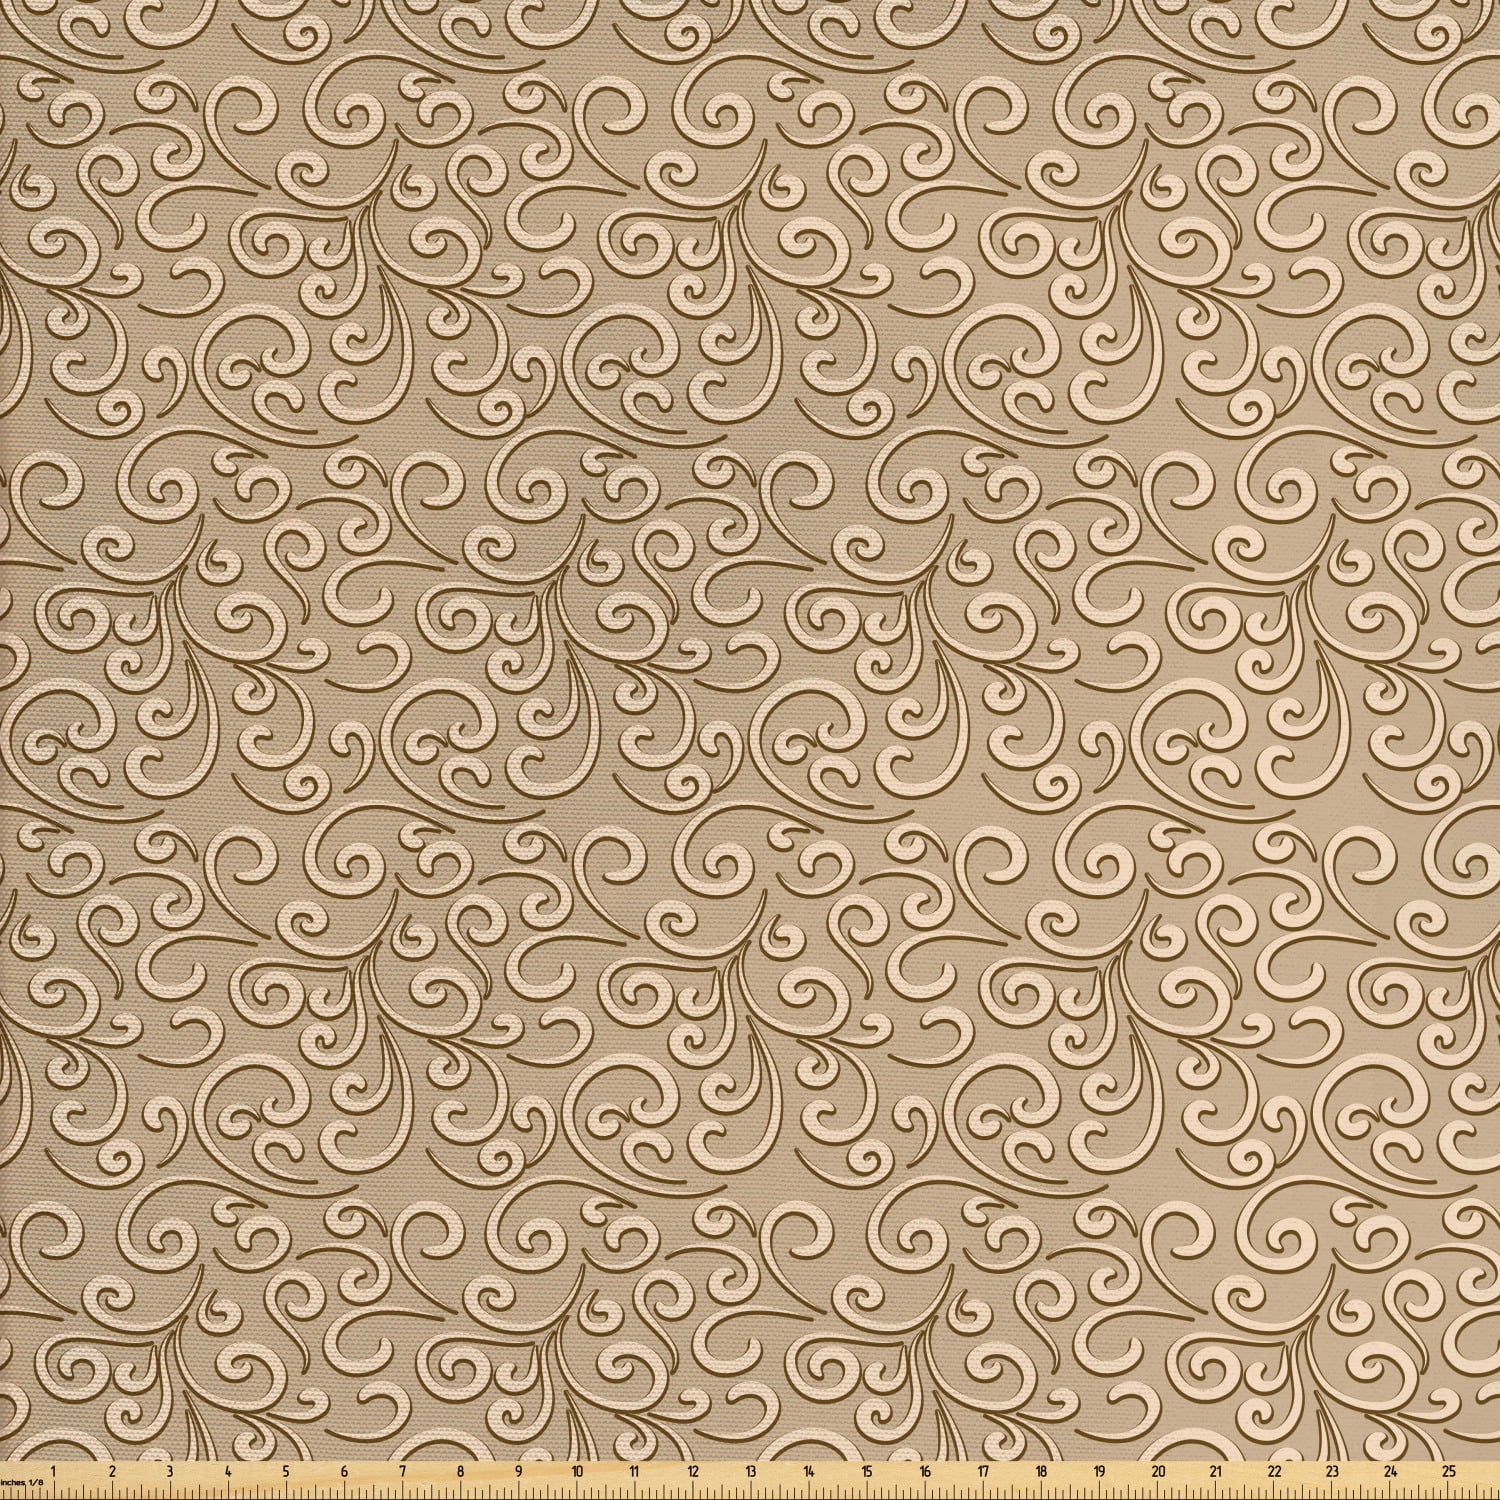 Beige Fabric By The Yard Baroque Floral Swirls Damask Pattern Classic